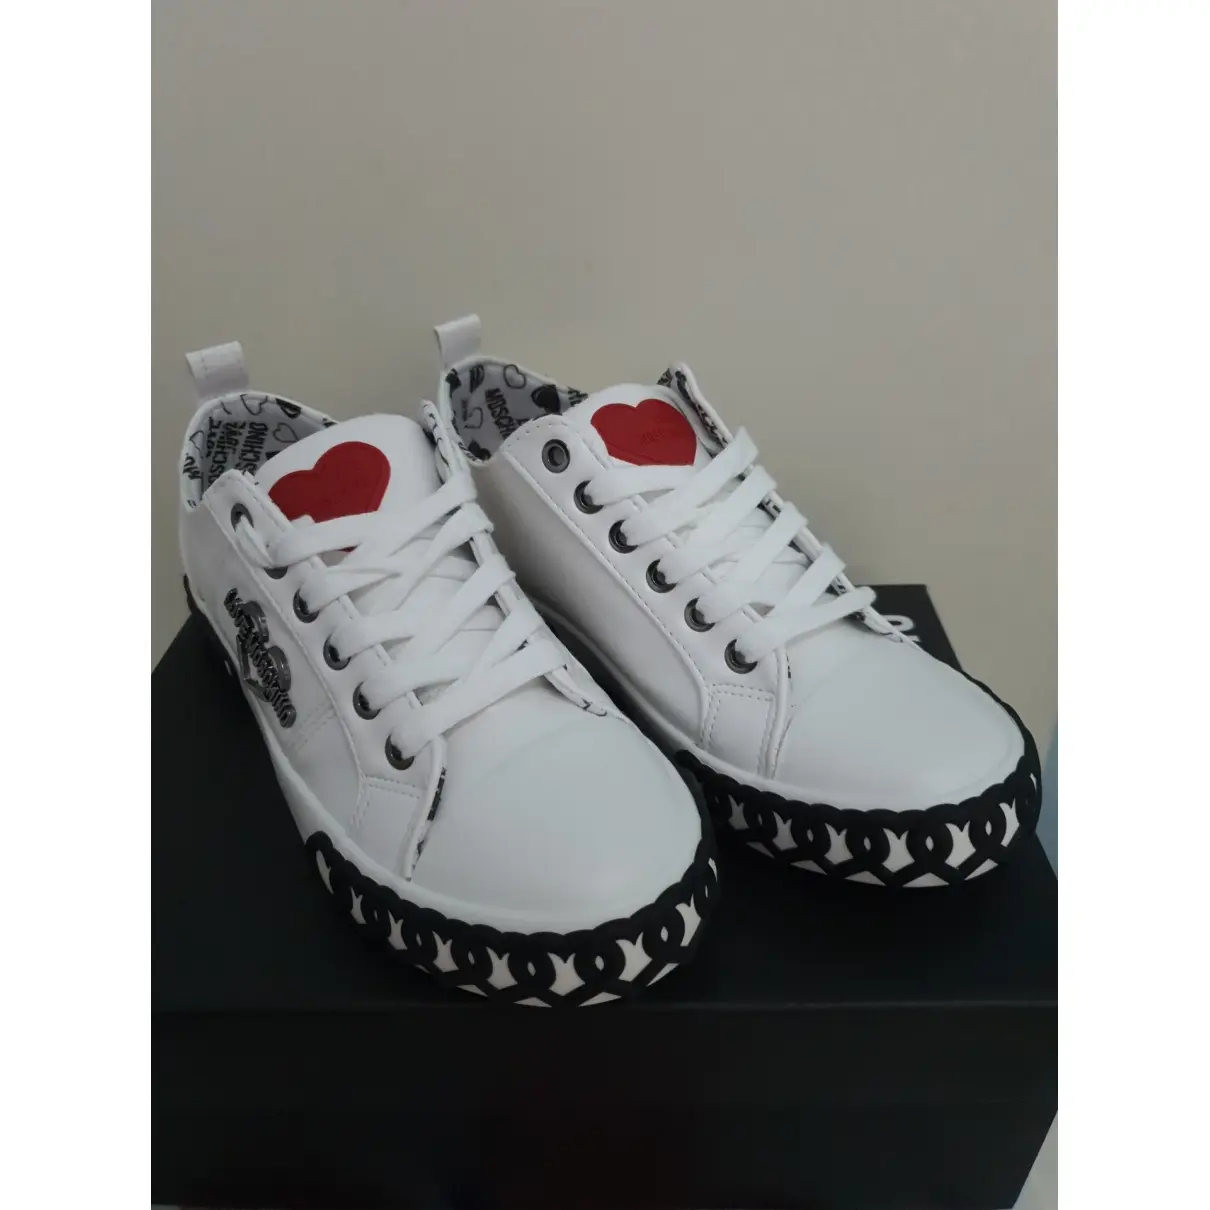 Buy Moschino Love Patent leather trainers online